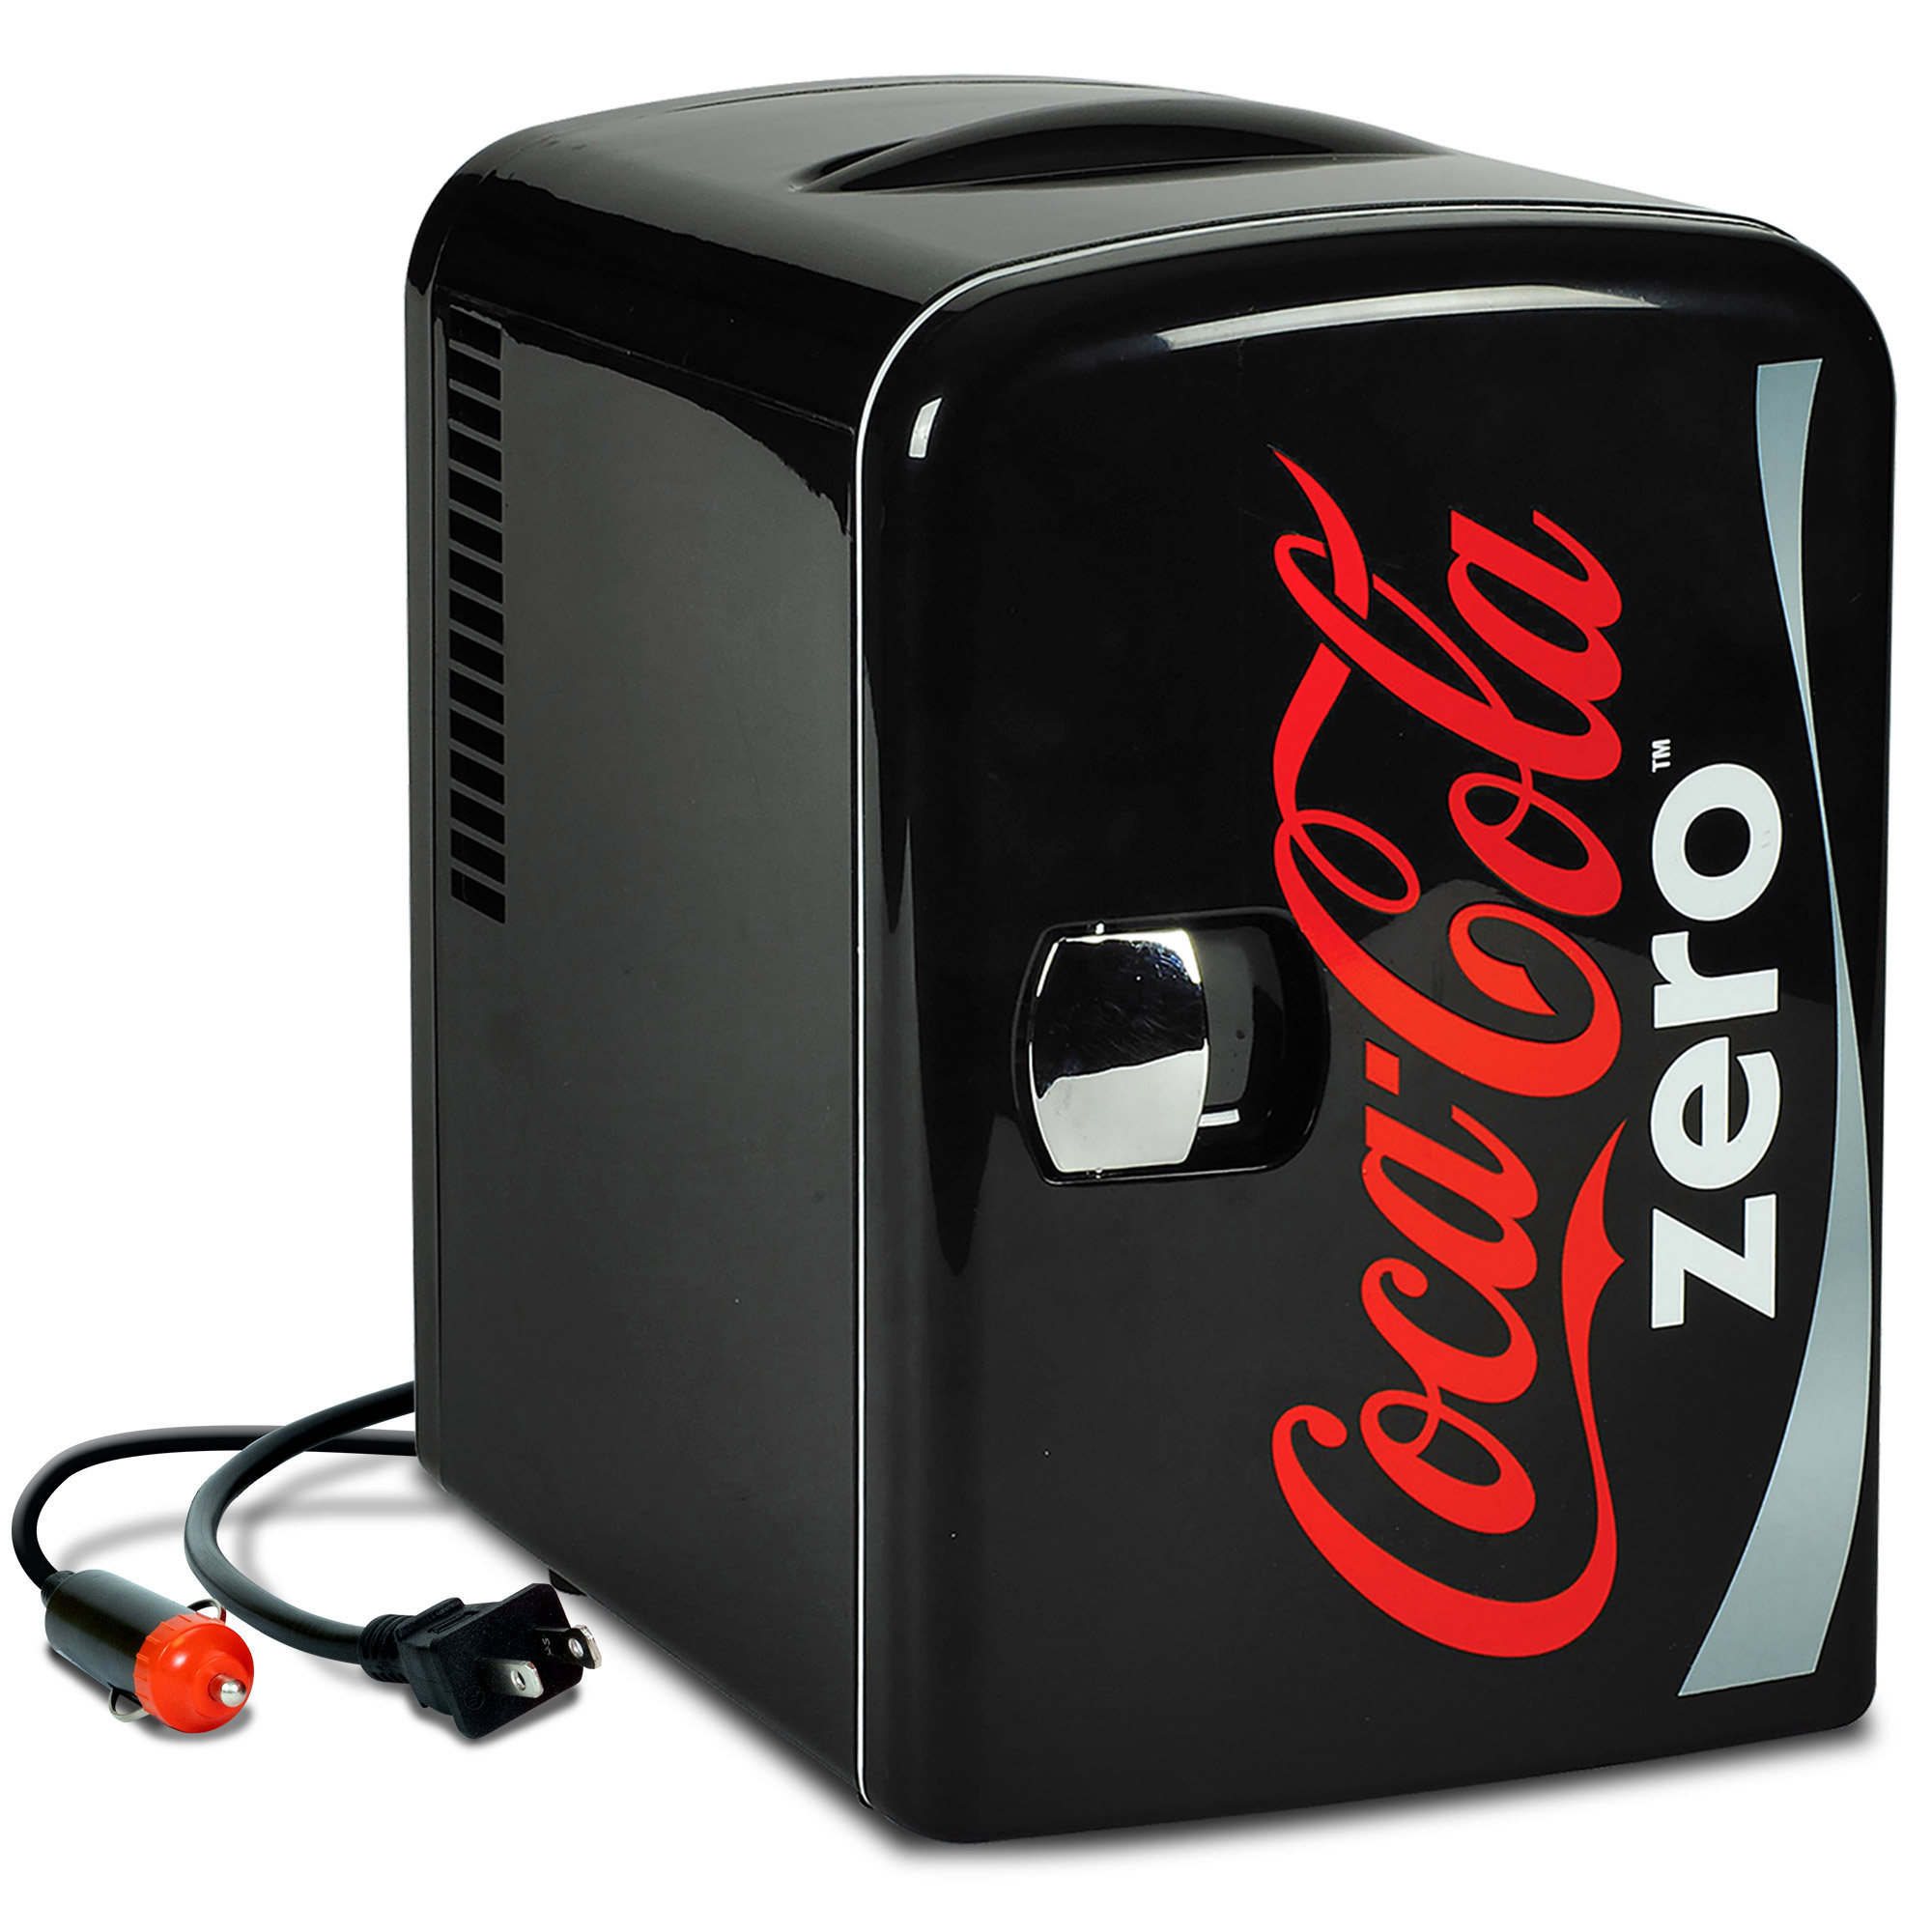 CROWNFUL Mini Fridge, 4 Liter/6 Can Portable Cooler and Warmer Personal  Refrigerator, AC/DC,Green 